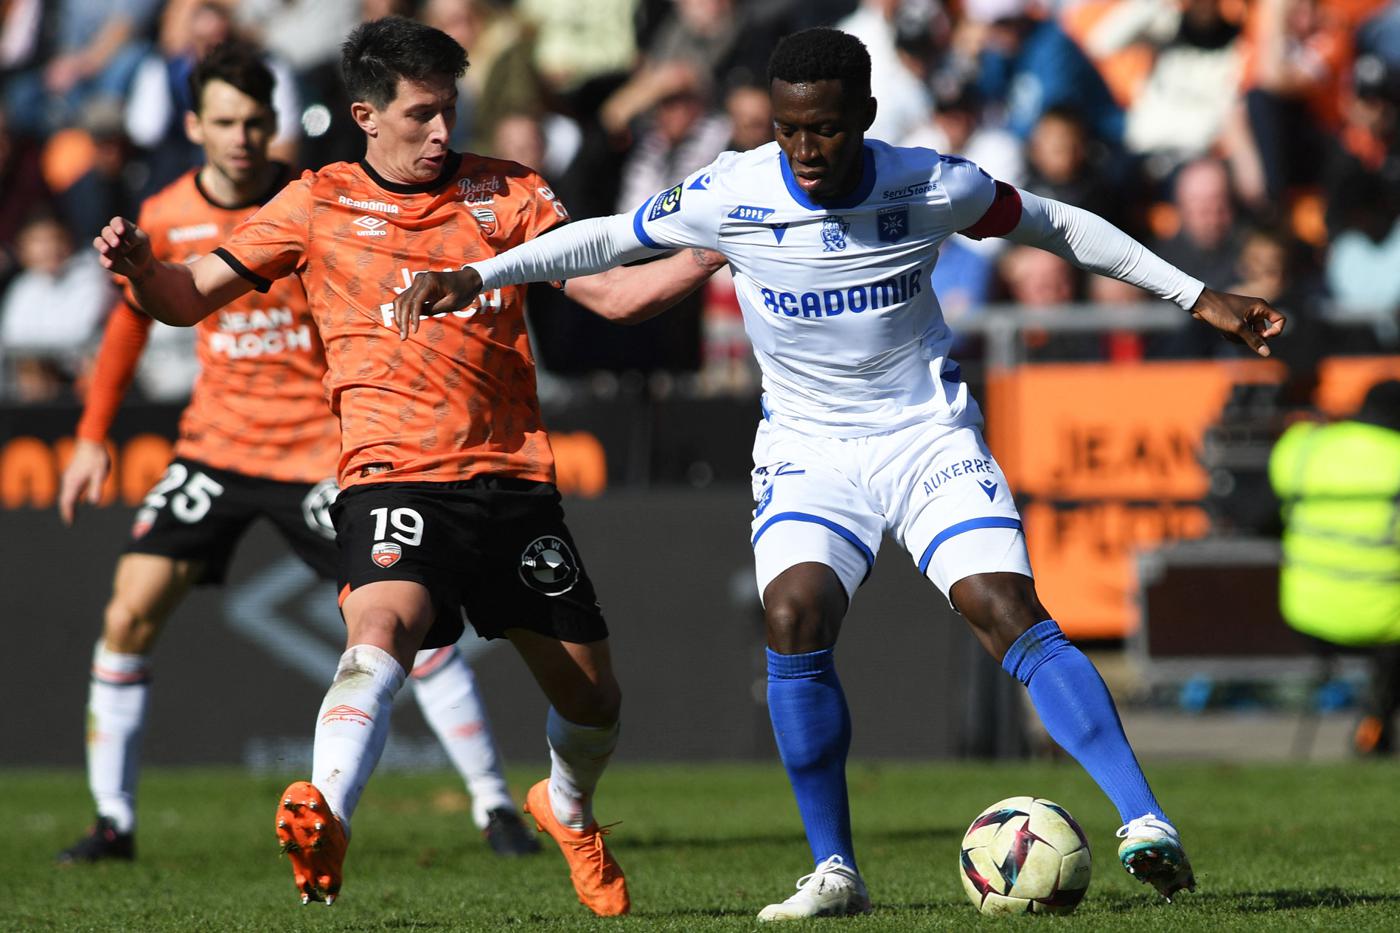 Lorient - Auxerre - 0-1. French Championship, 25th round. Match review, statistics.